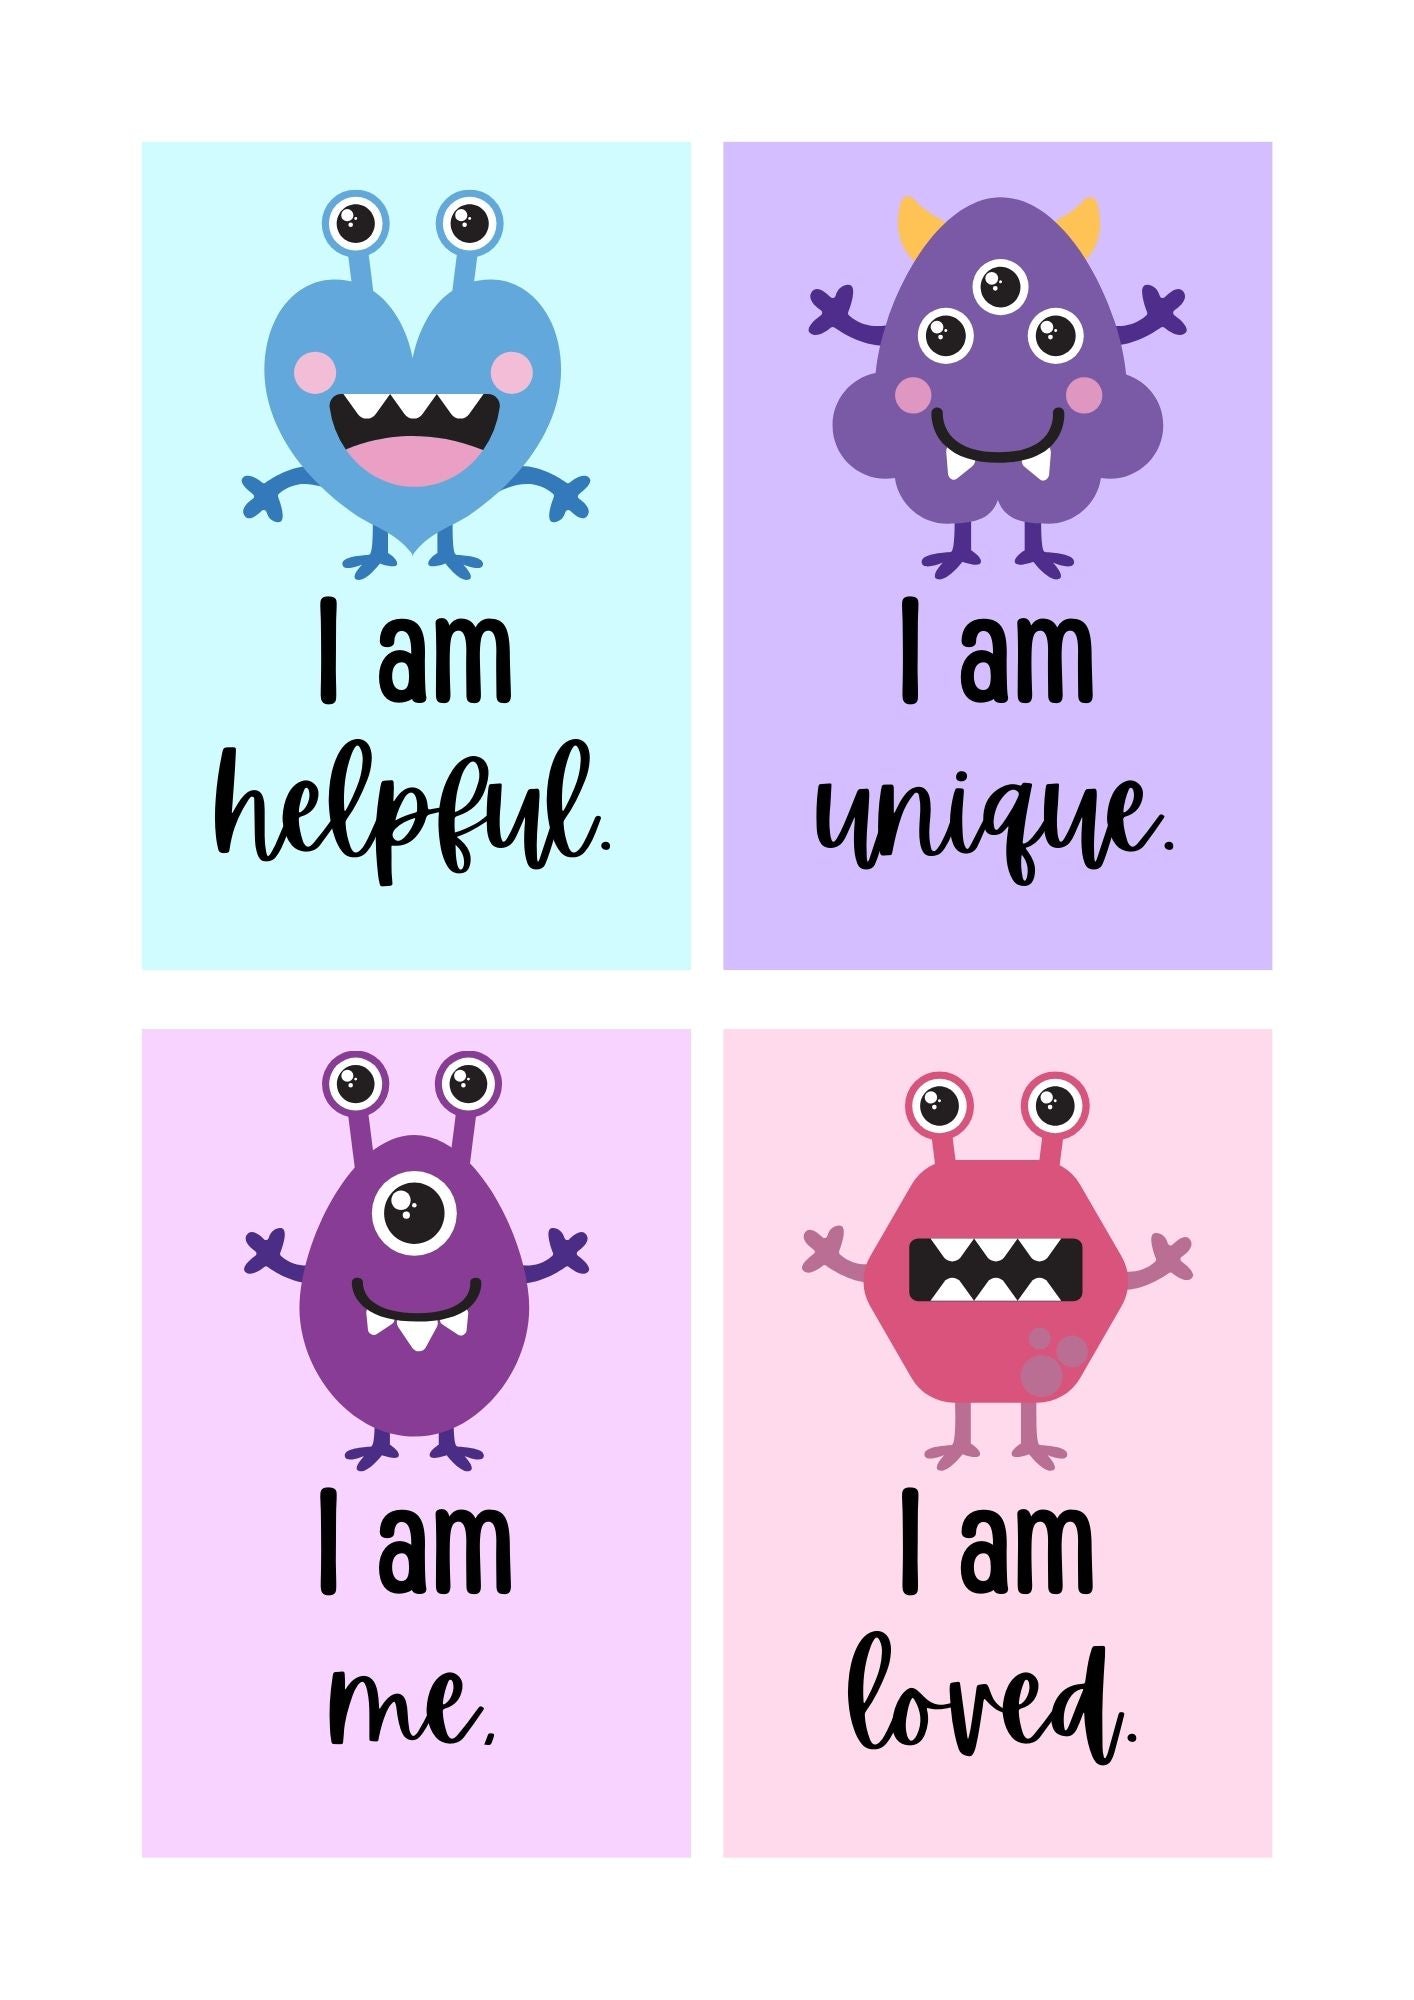 Emotions and monsters, Childrens mental health work book, emotion work book with positive cards!